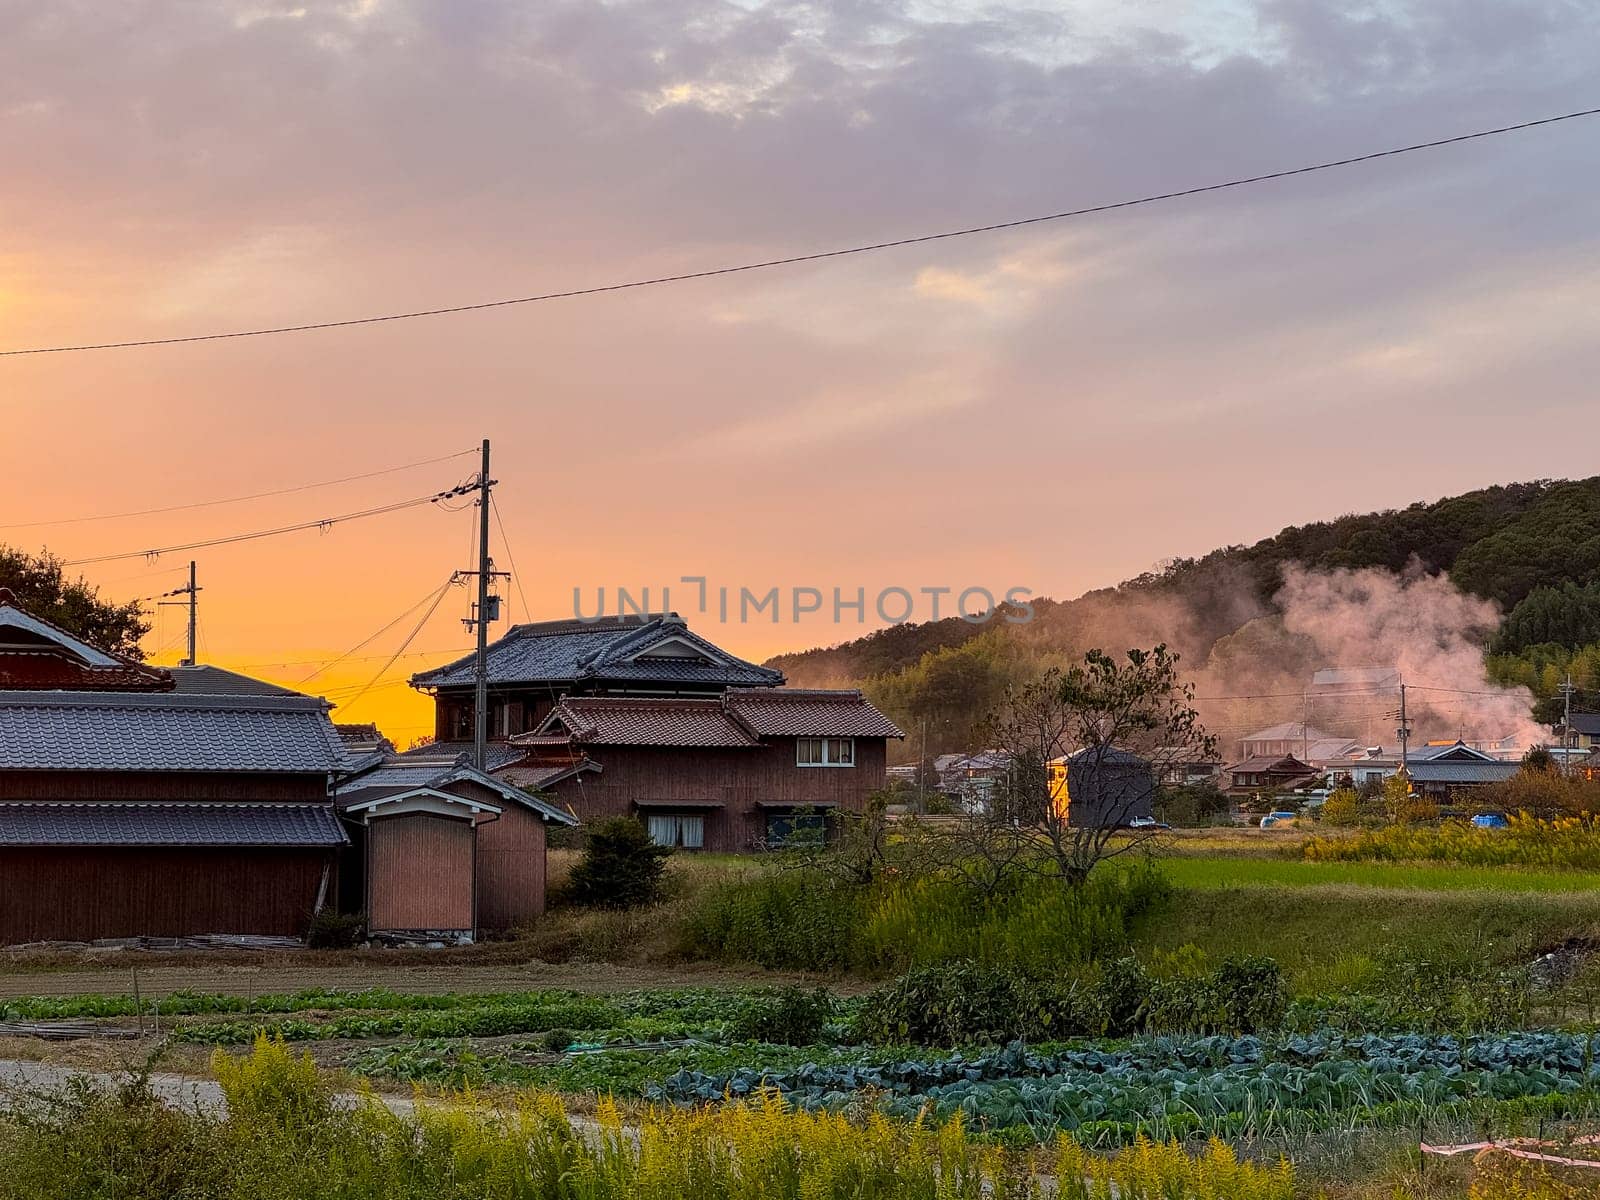 Smoke rises from fire by traditional houses in rural Japan with sunset glow in sky by Osaze